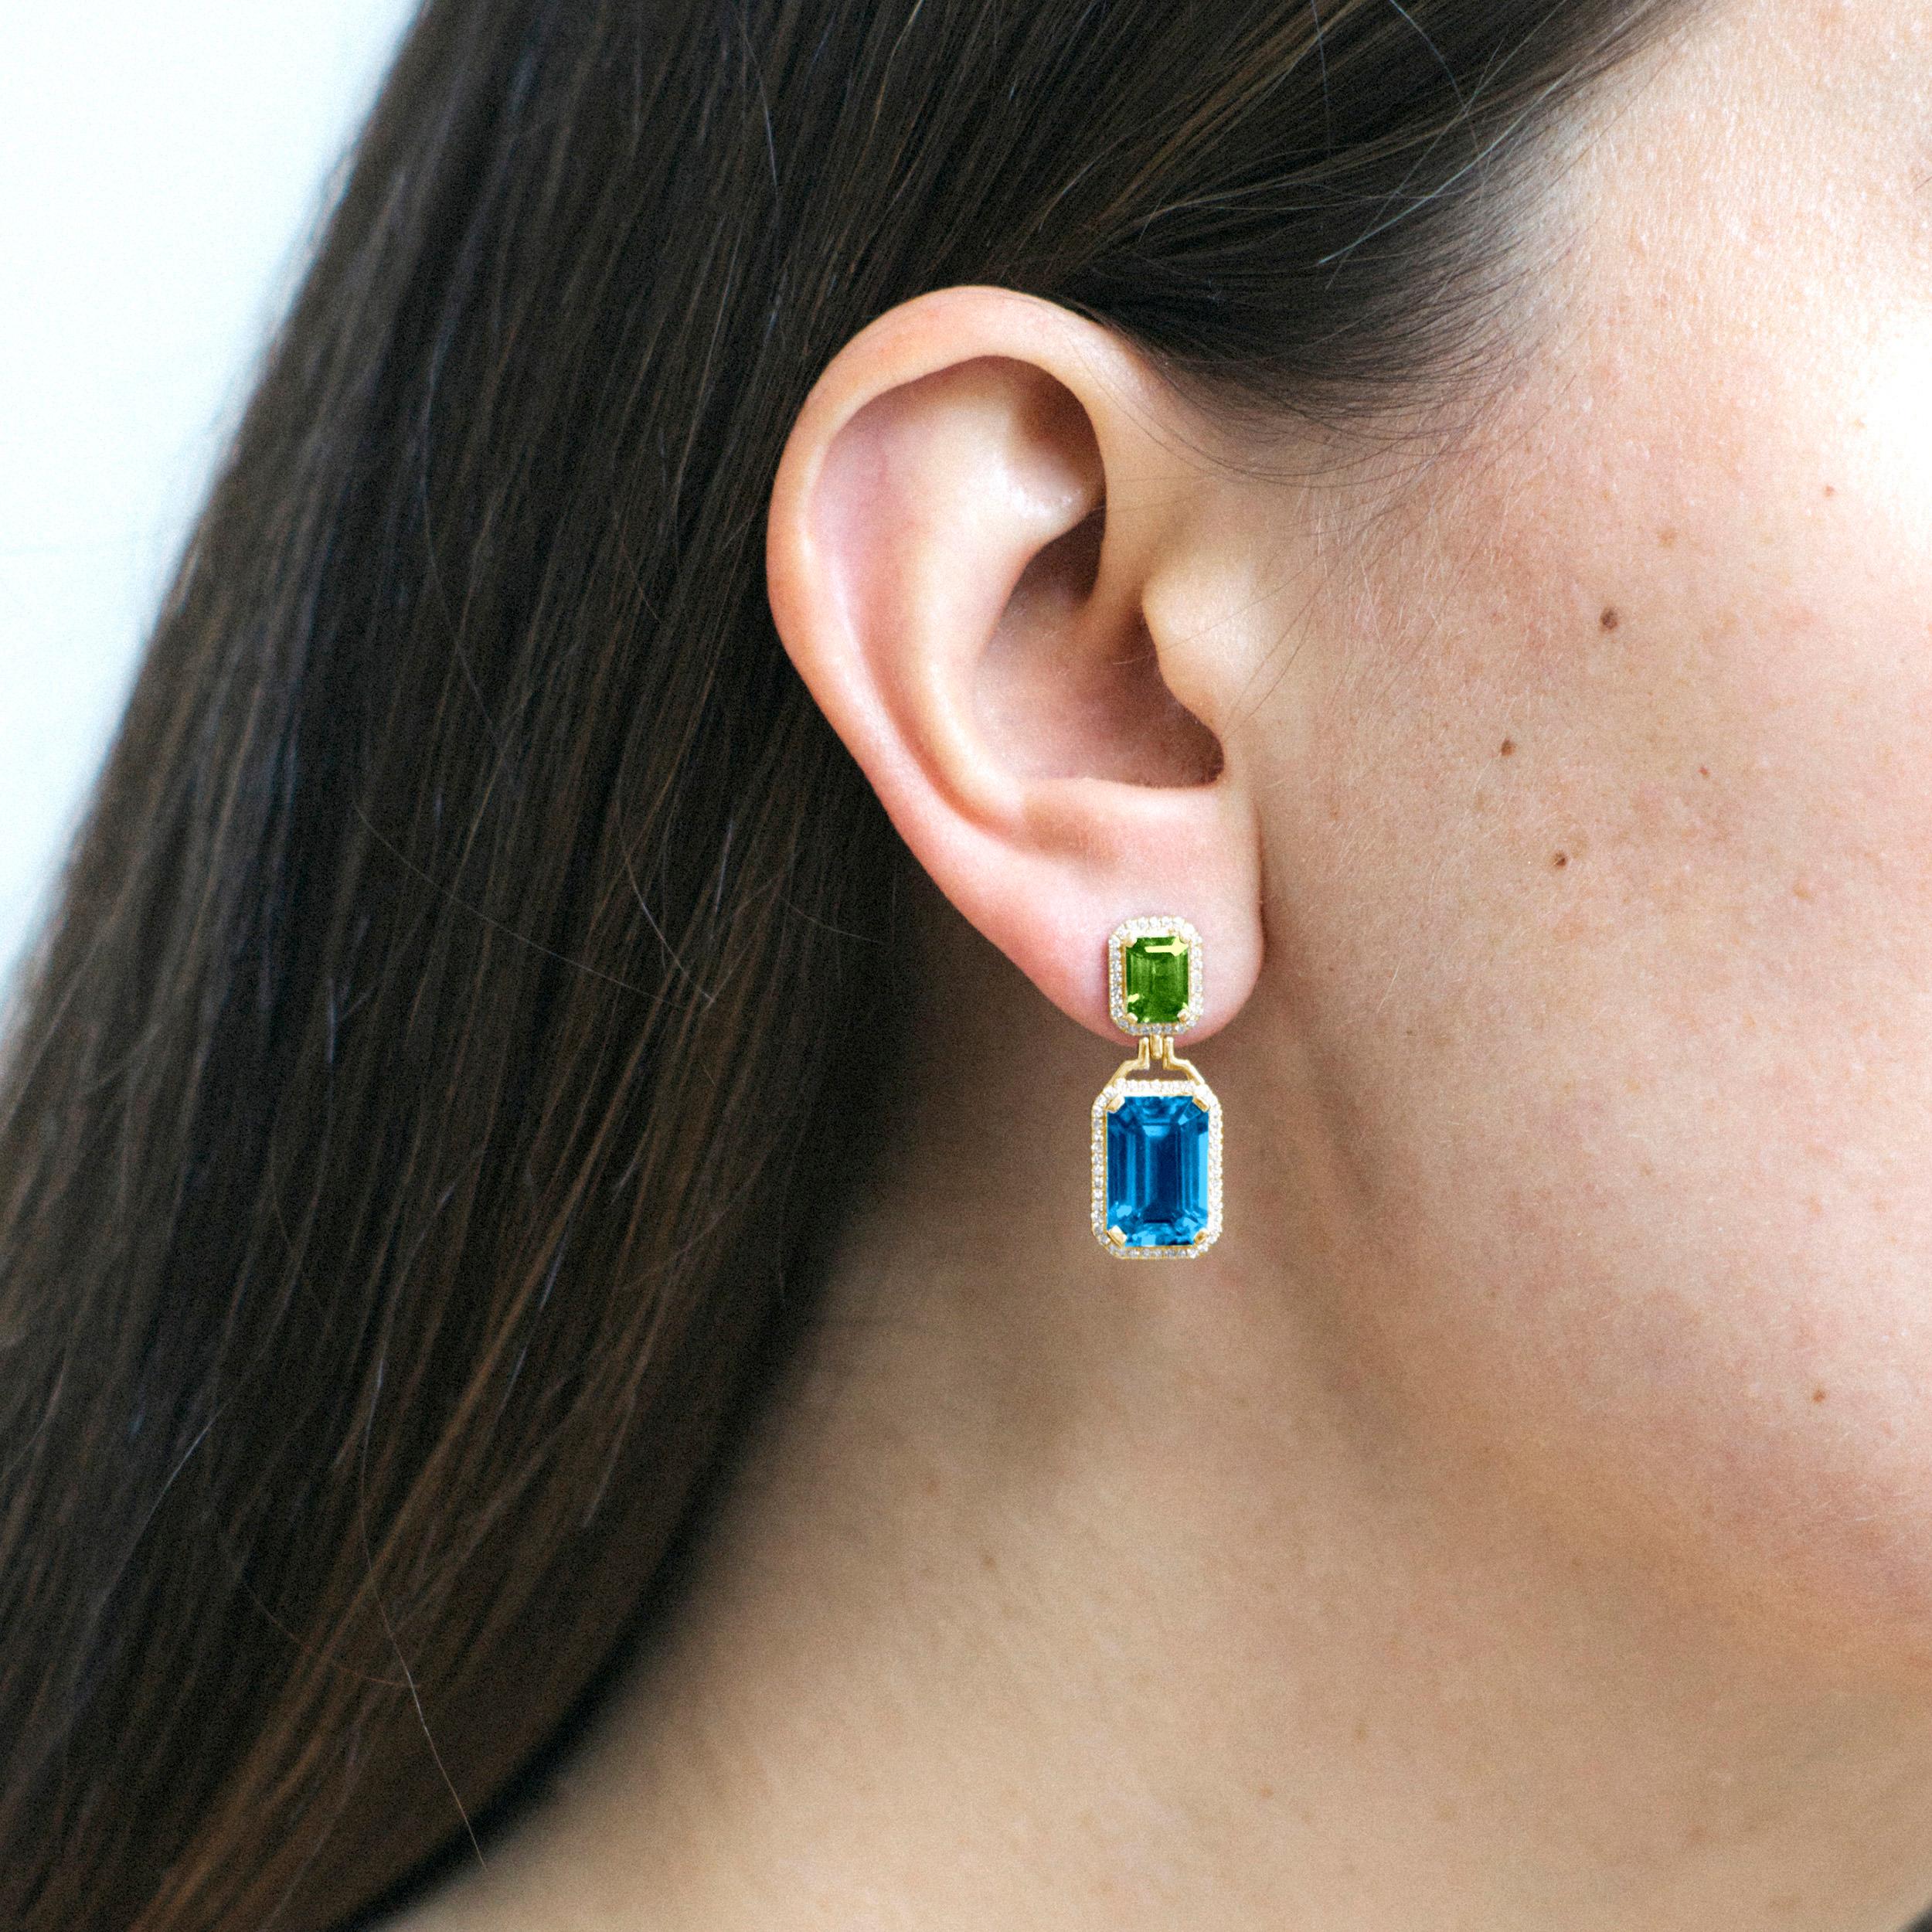 London Blue Topaz and Peridot Emerald Cut Earrings in 18K Yellow Gold with Diamonds, from 'Gossip' Collection.
Please allow 2-4 weeks for this item to be delivered

Stone Size: 12 x 8 mm & 7 x 5 mm 

Diamonds: G-H / VS, Approx Wt: 0.40 Carats